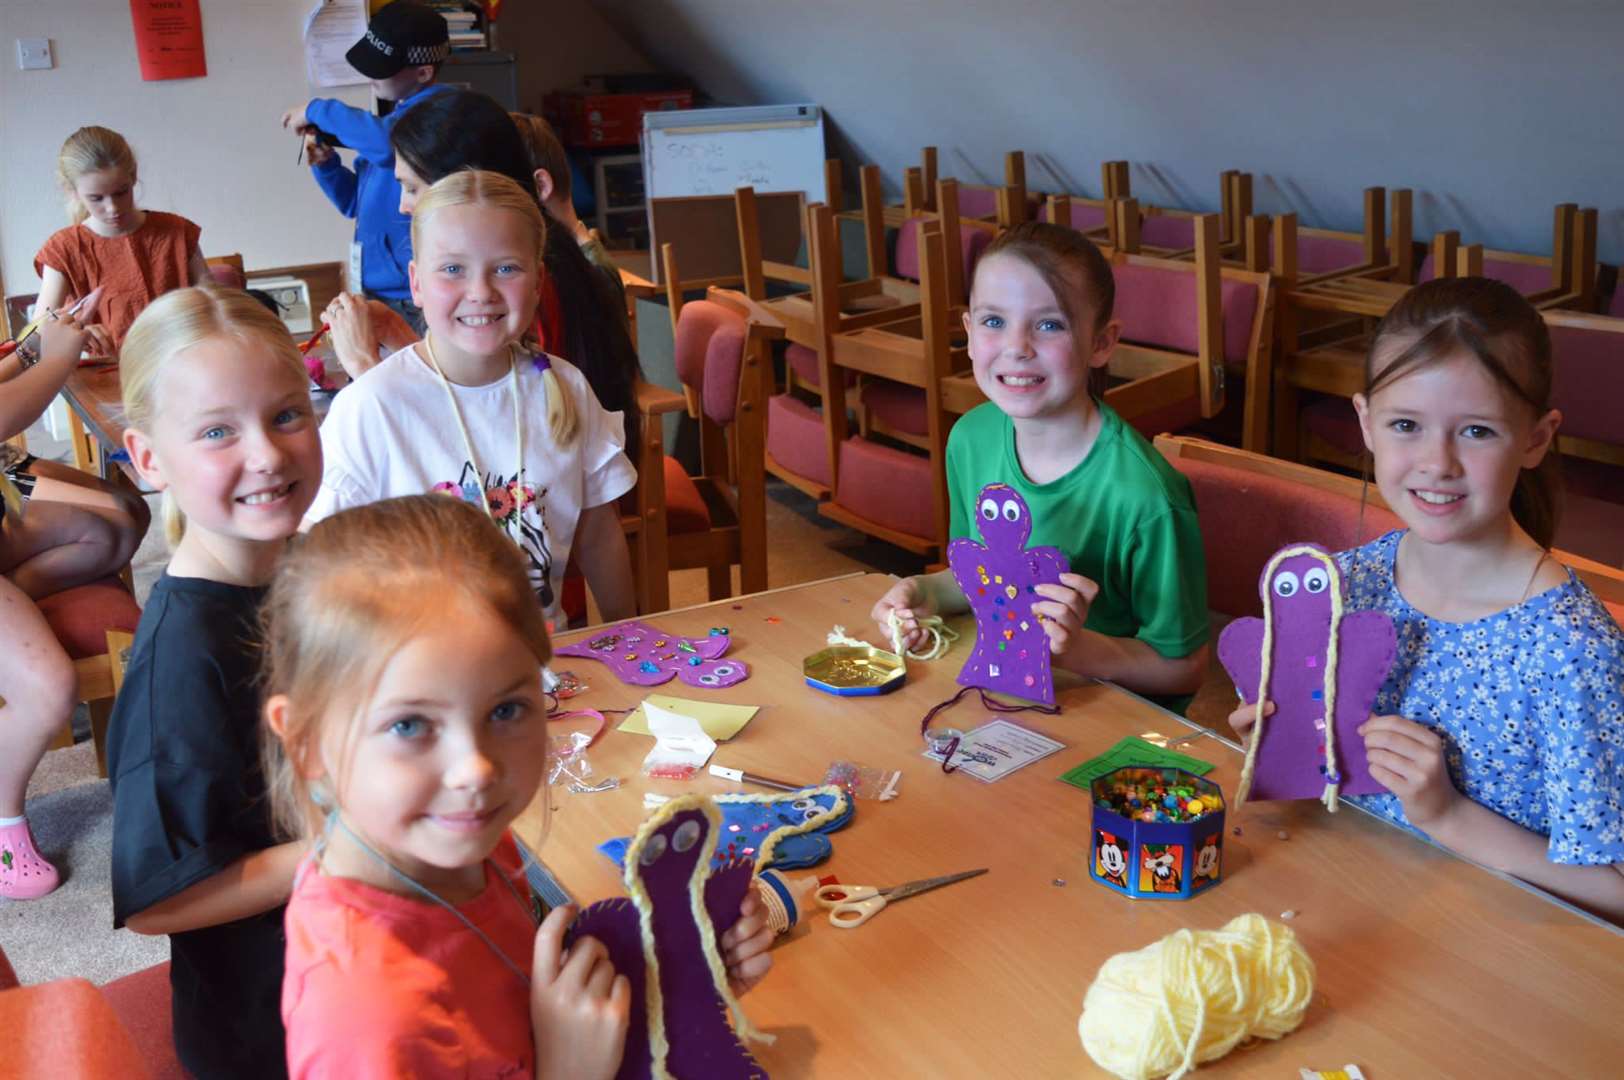 A group of girls enjoying a craft session.